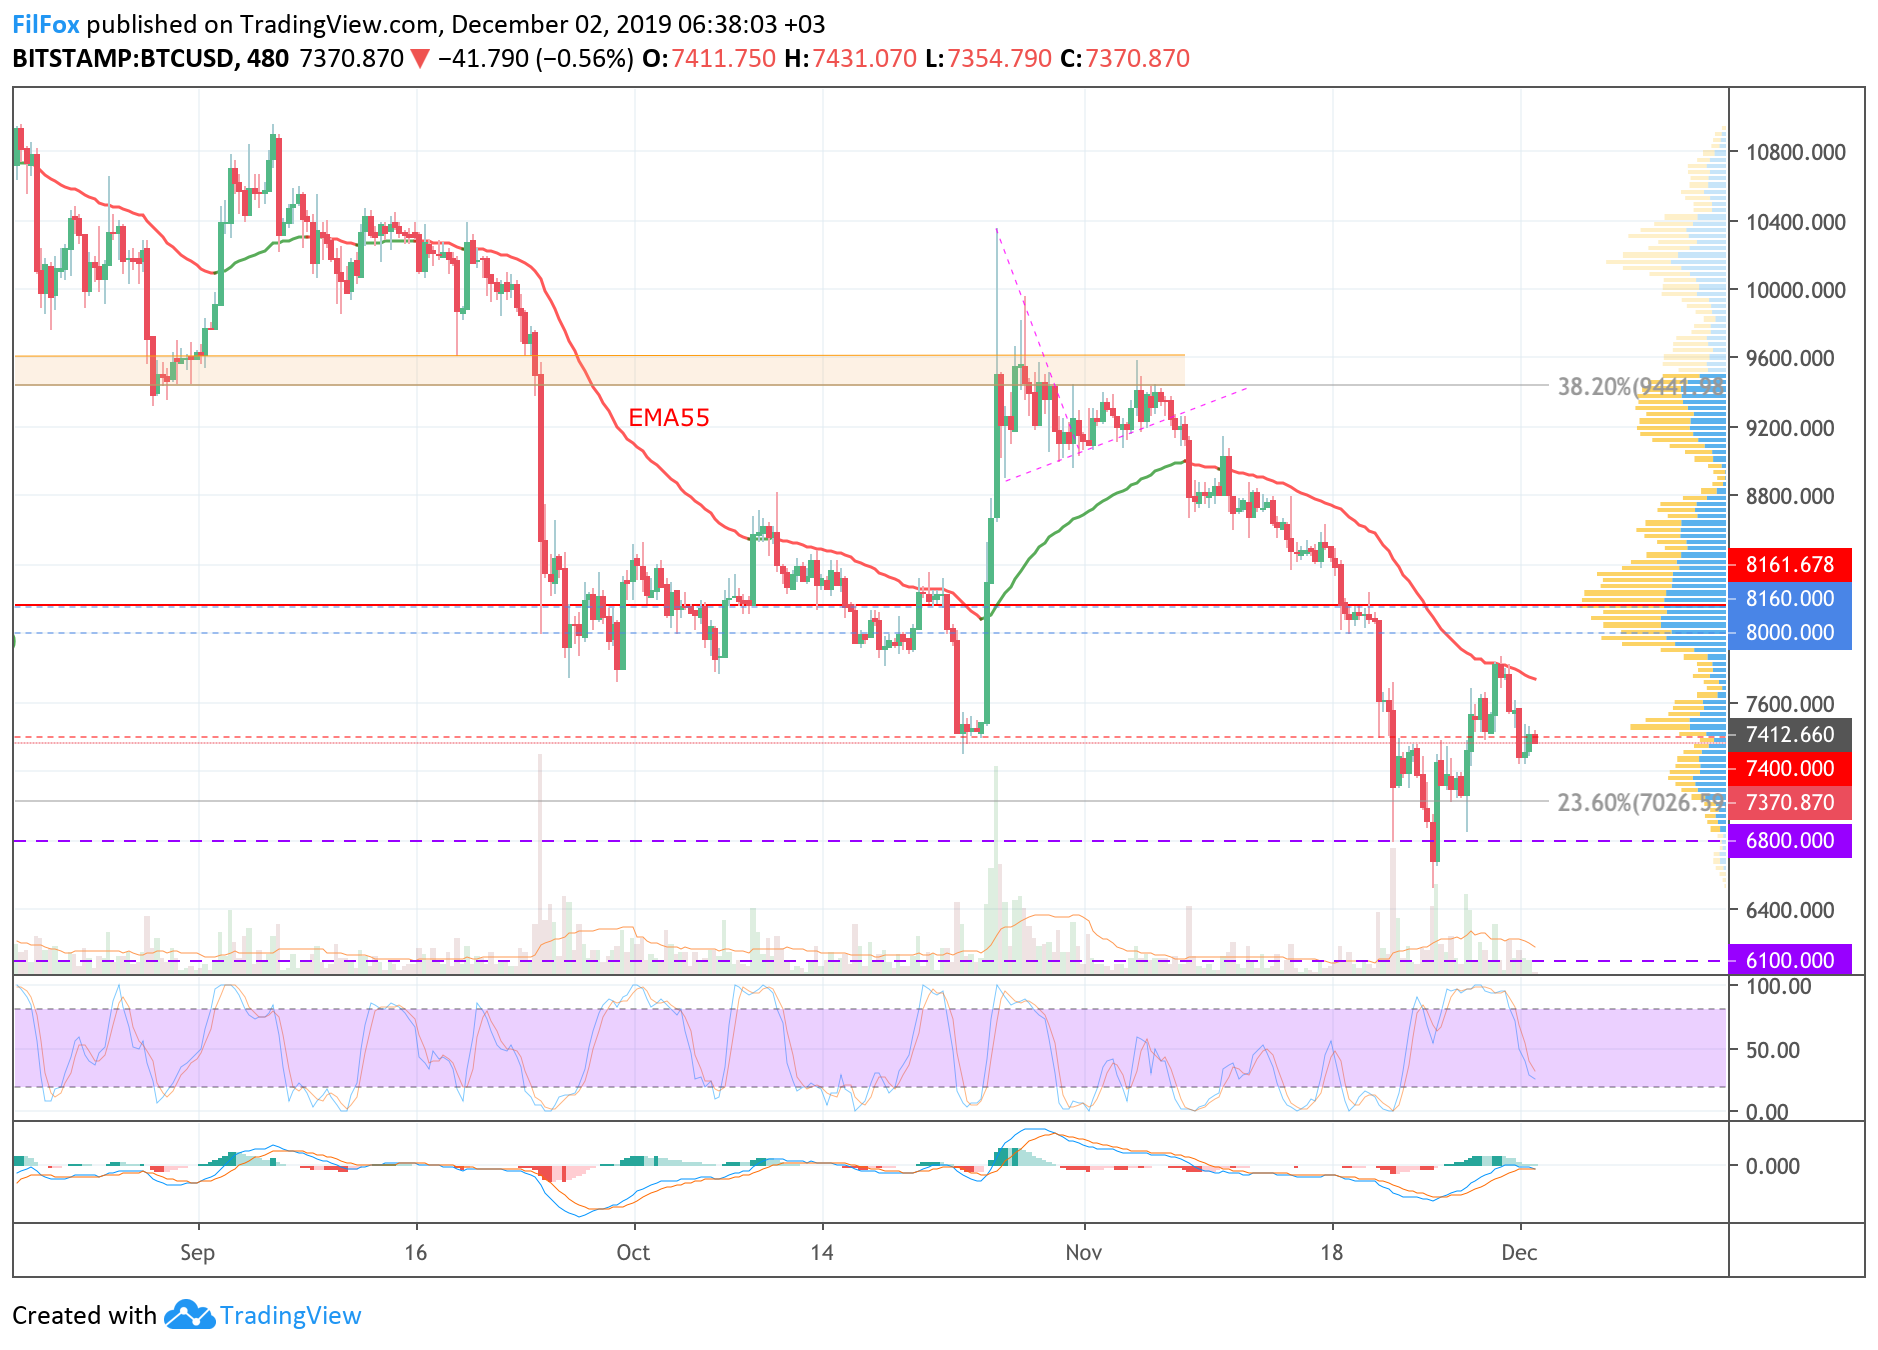 Analysis of cryptocurrency pairs BTC / USD, ETH / USD and XRP / USD on 02/02/2019